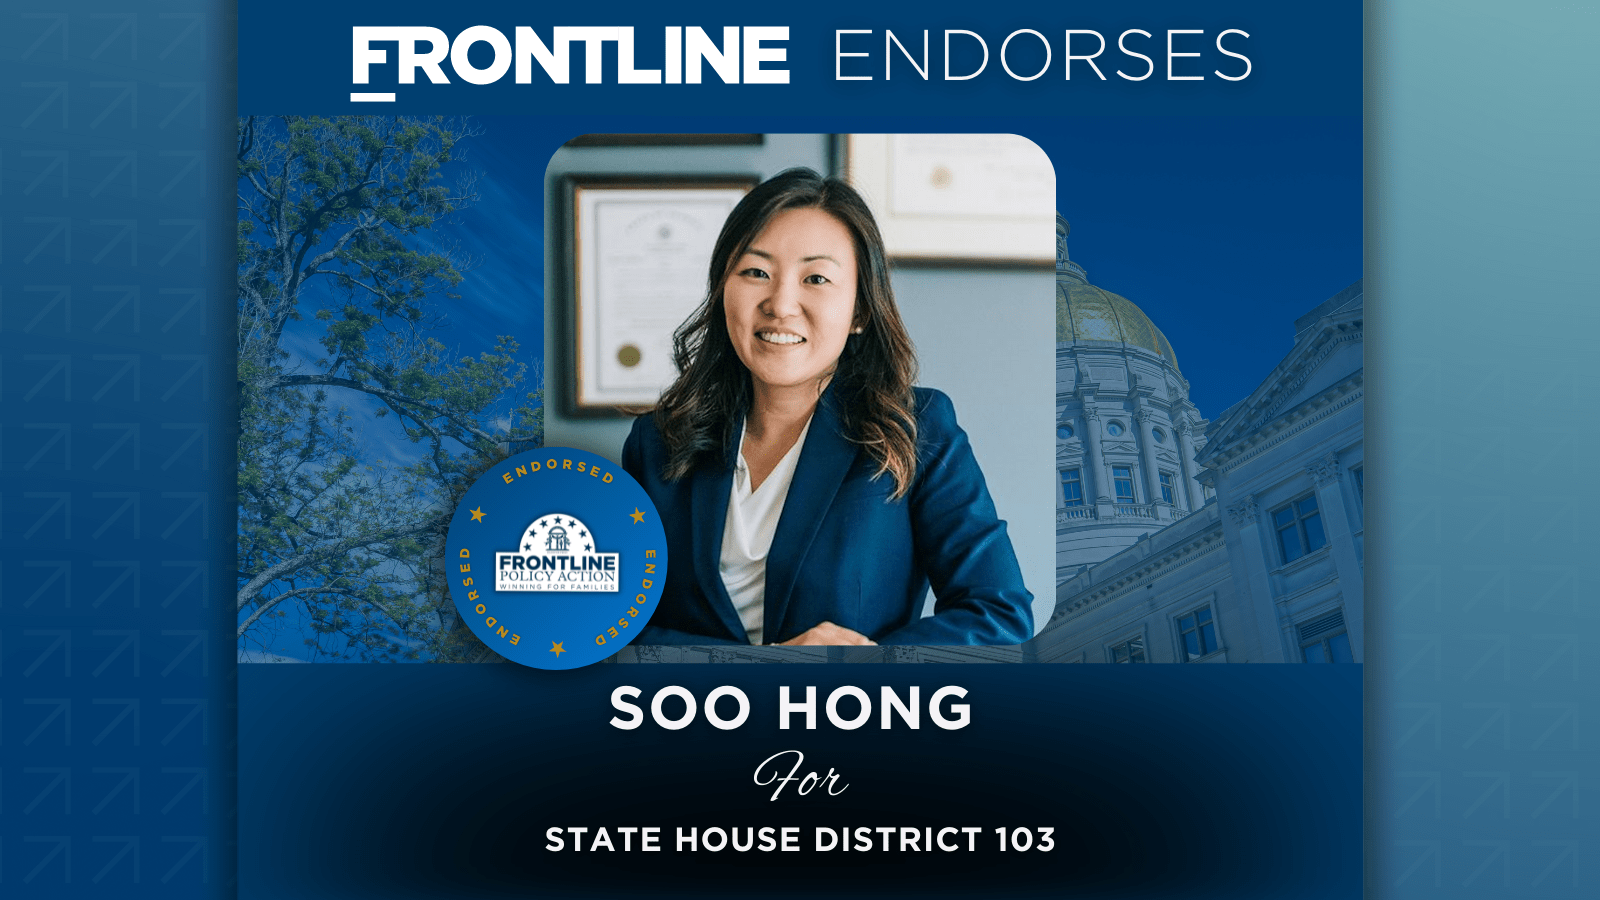 BREAKING: Frontline Endorses Soo Hong for State House District 103